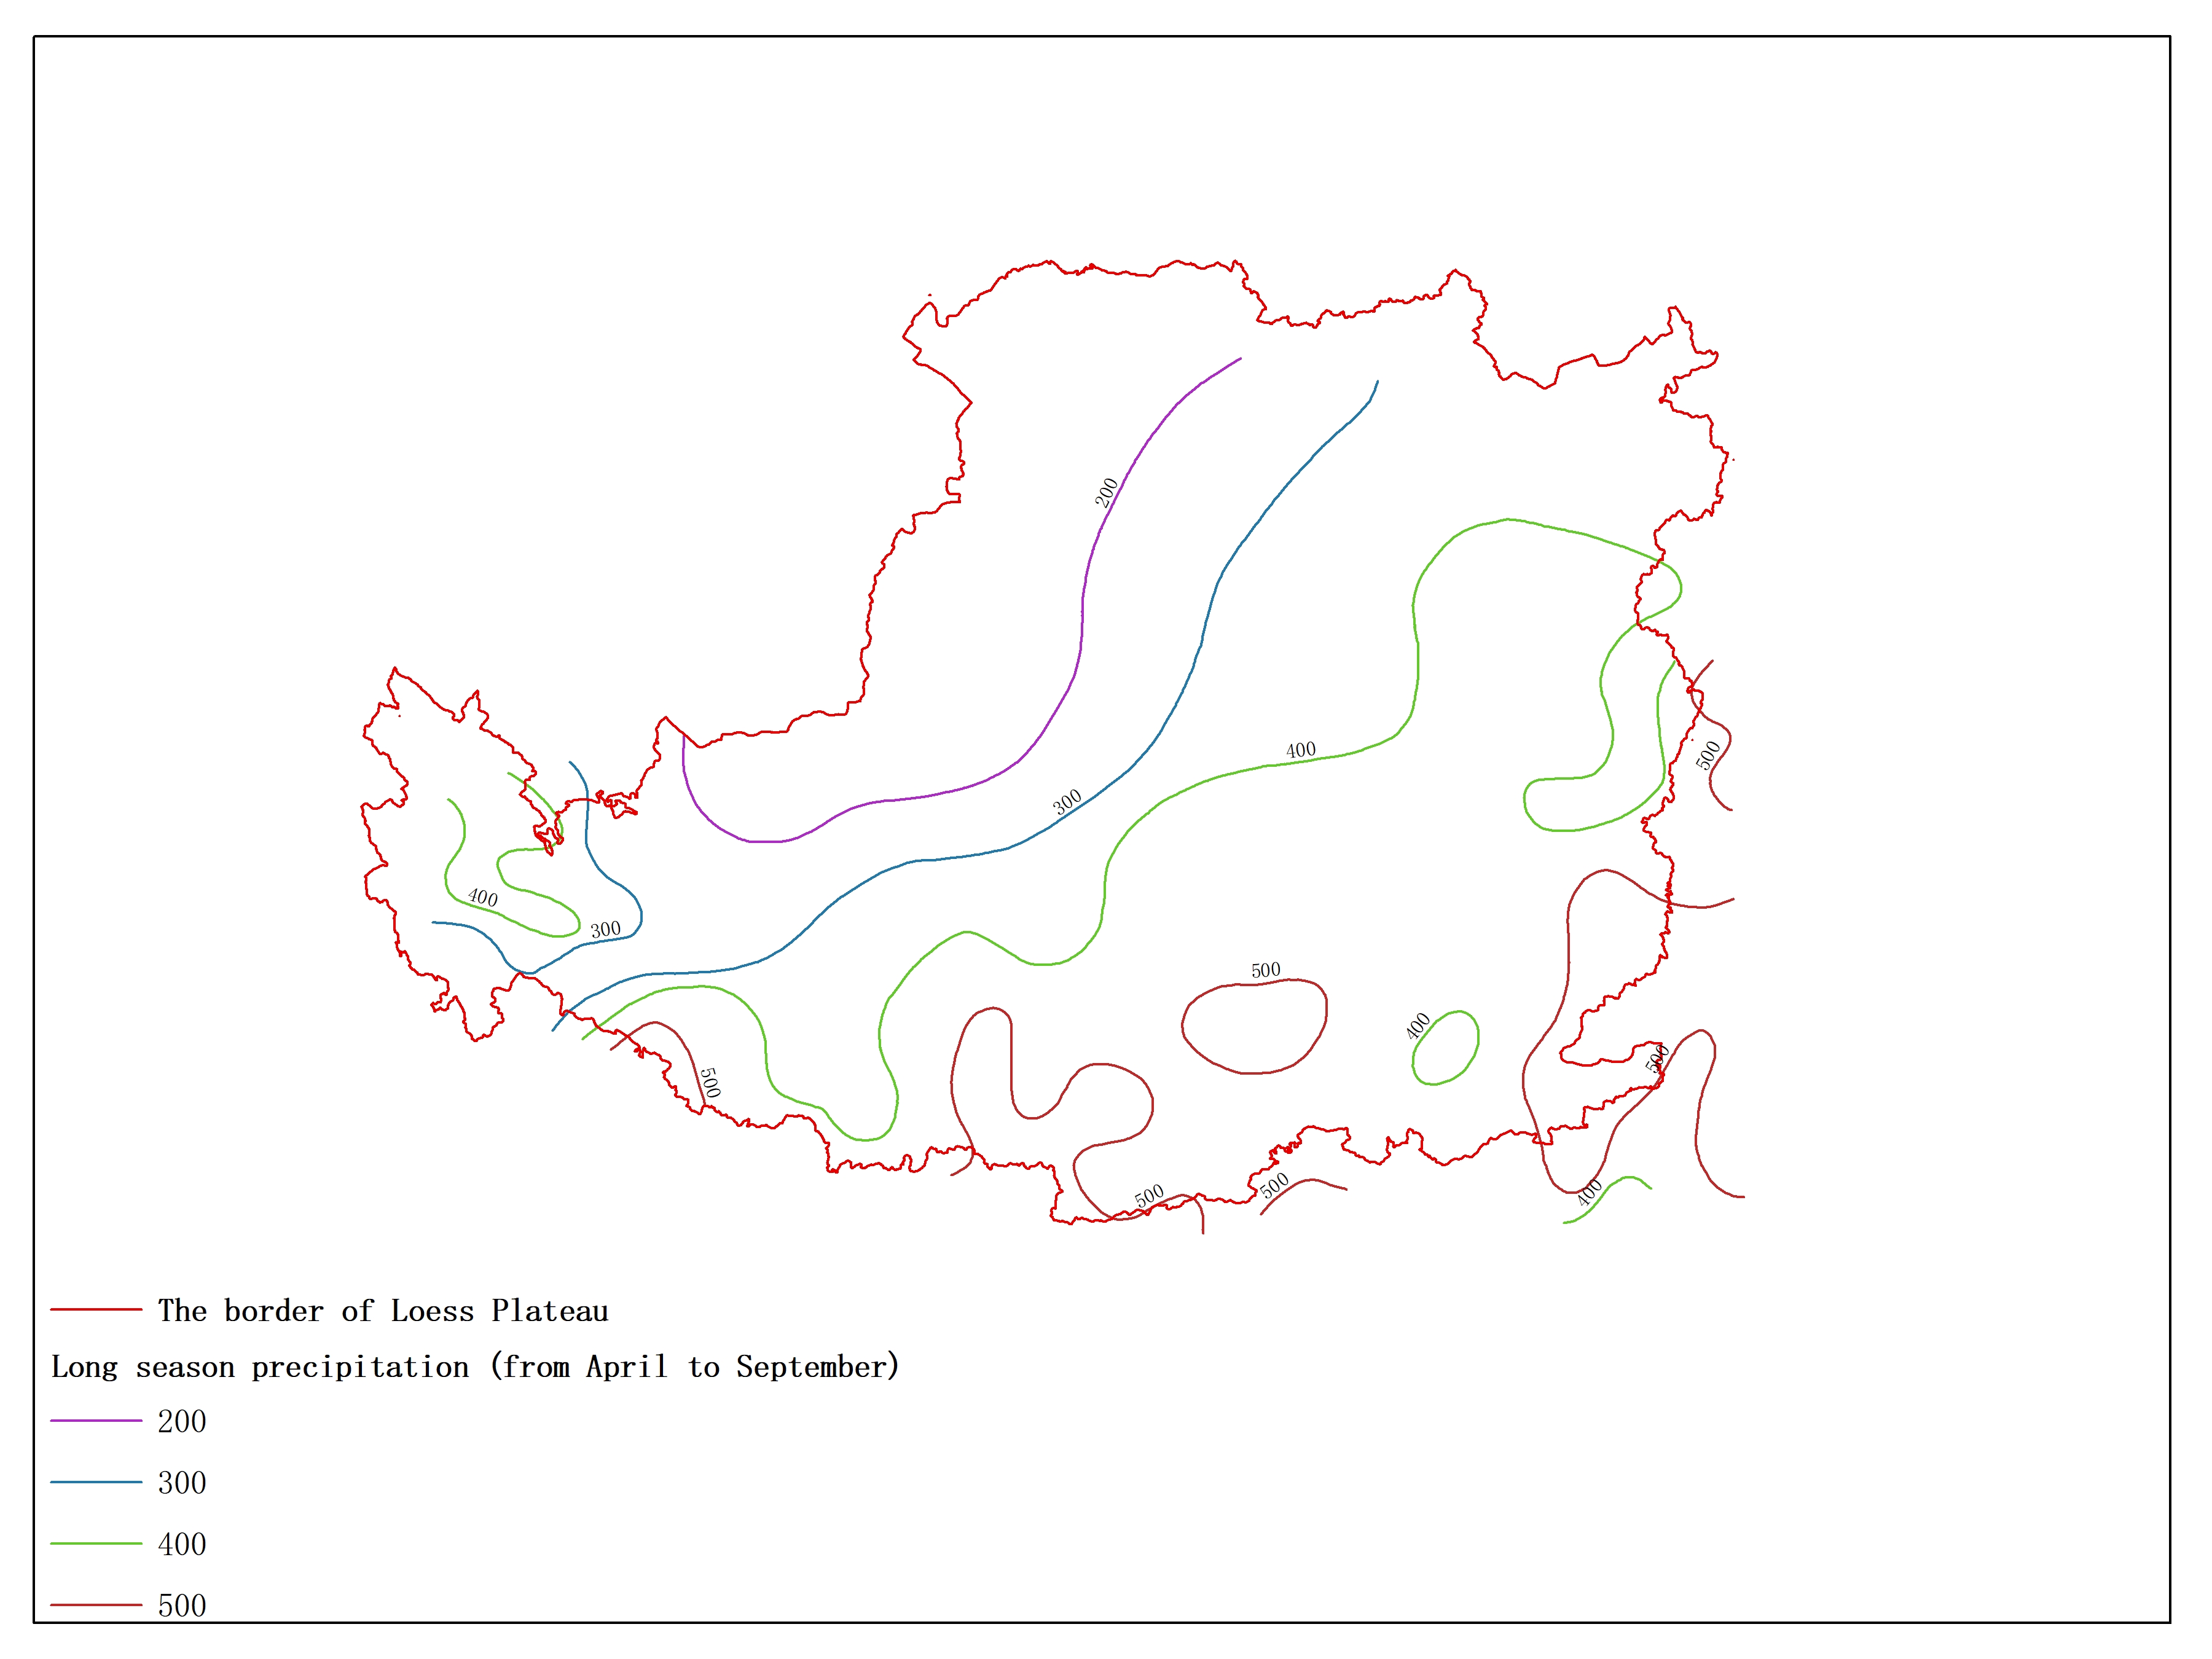 Agricultural climate resource atlas of Loess Plateau-Long season precipitation (from April to September)